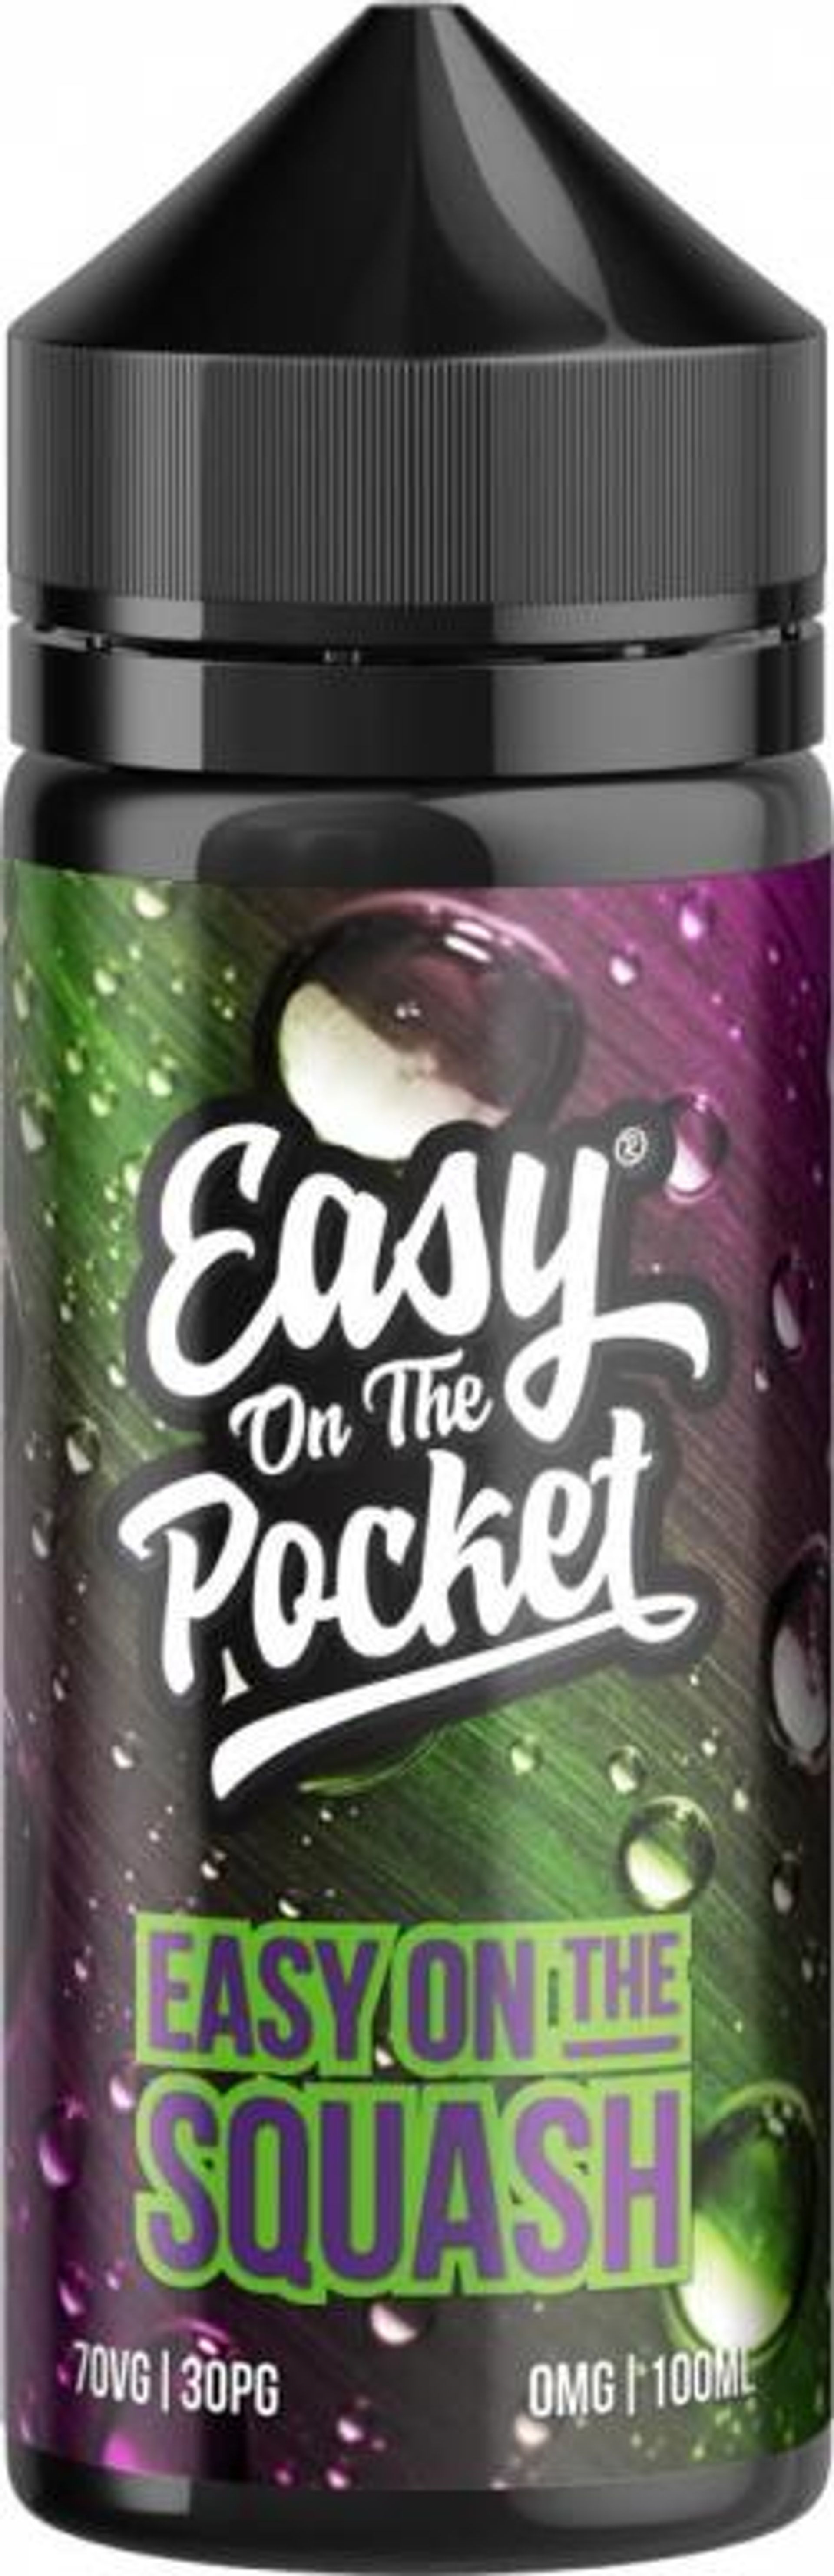 Image of Easy On The Squash by Easy On The Pocket